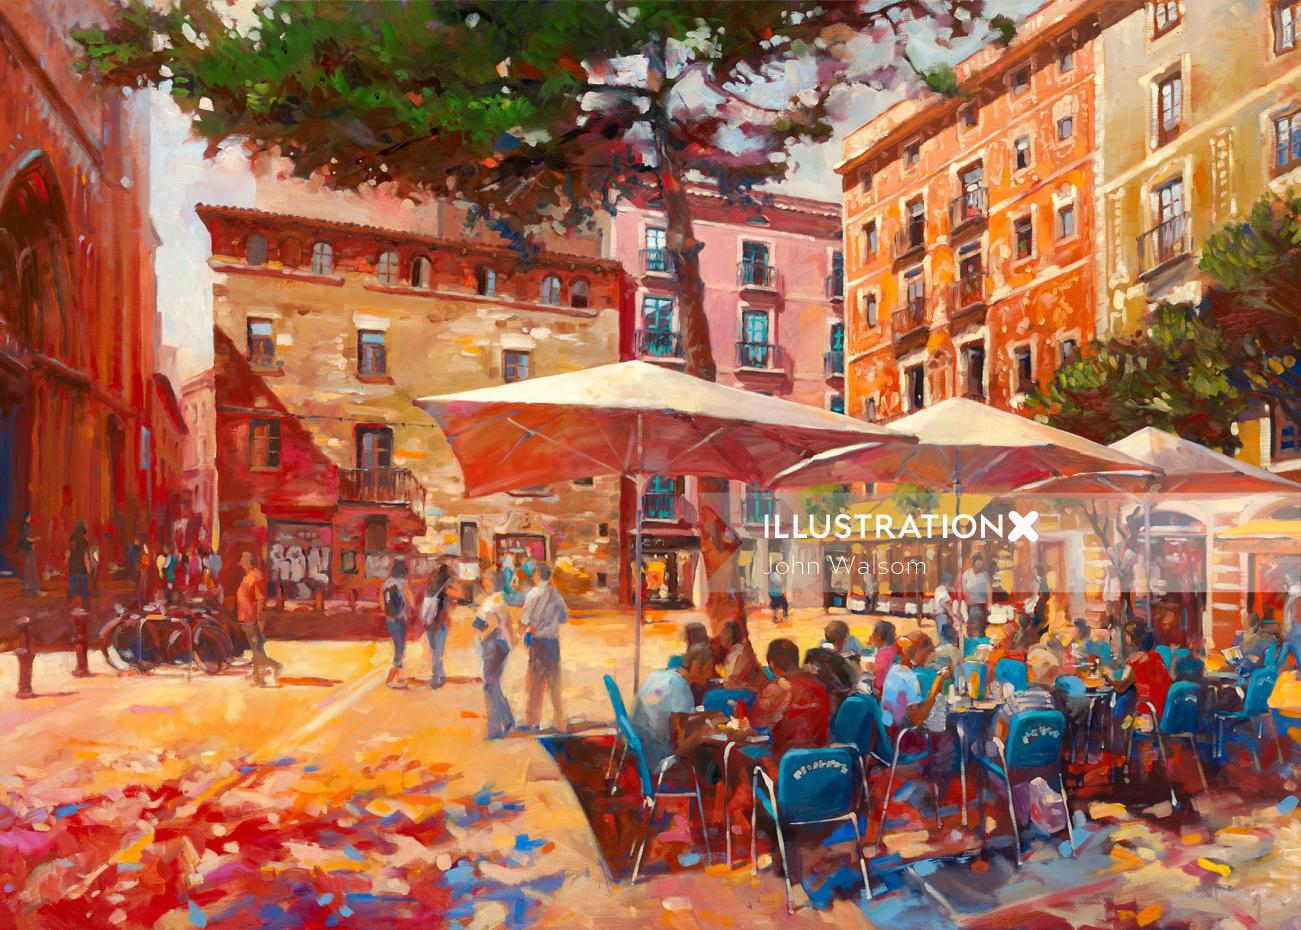 Market place painting by John Walsom